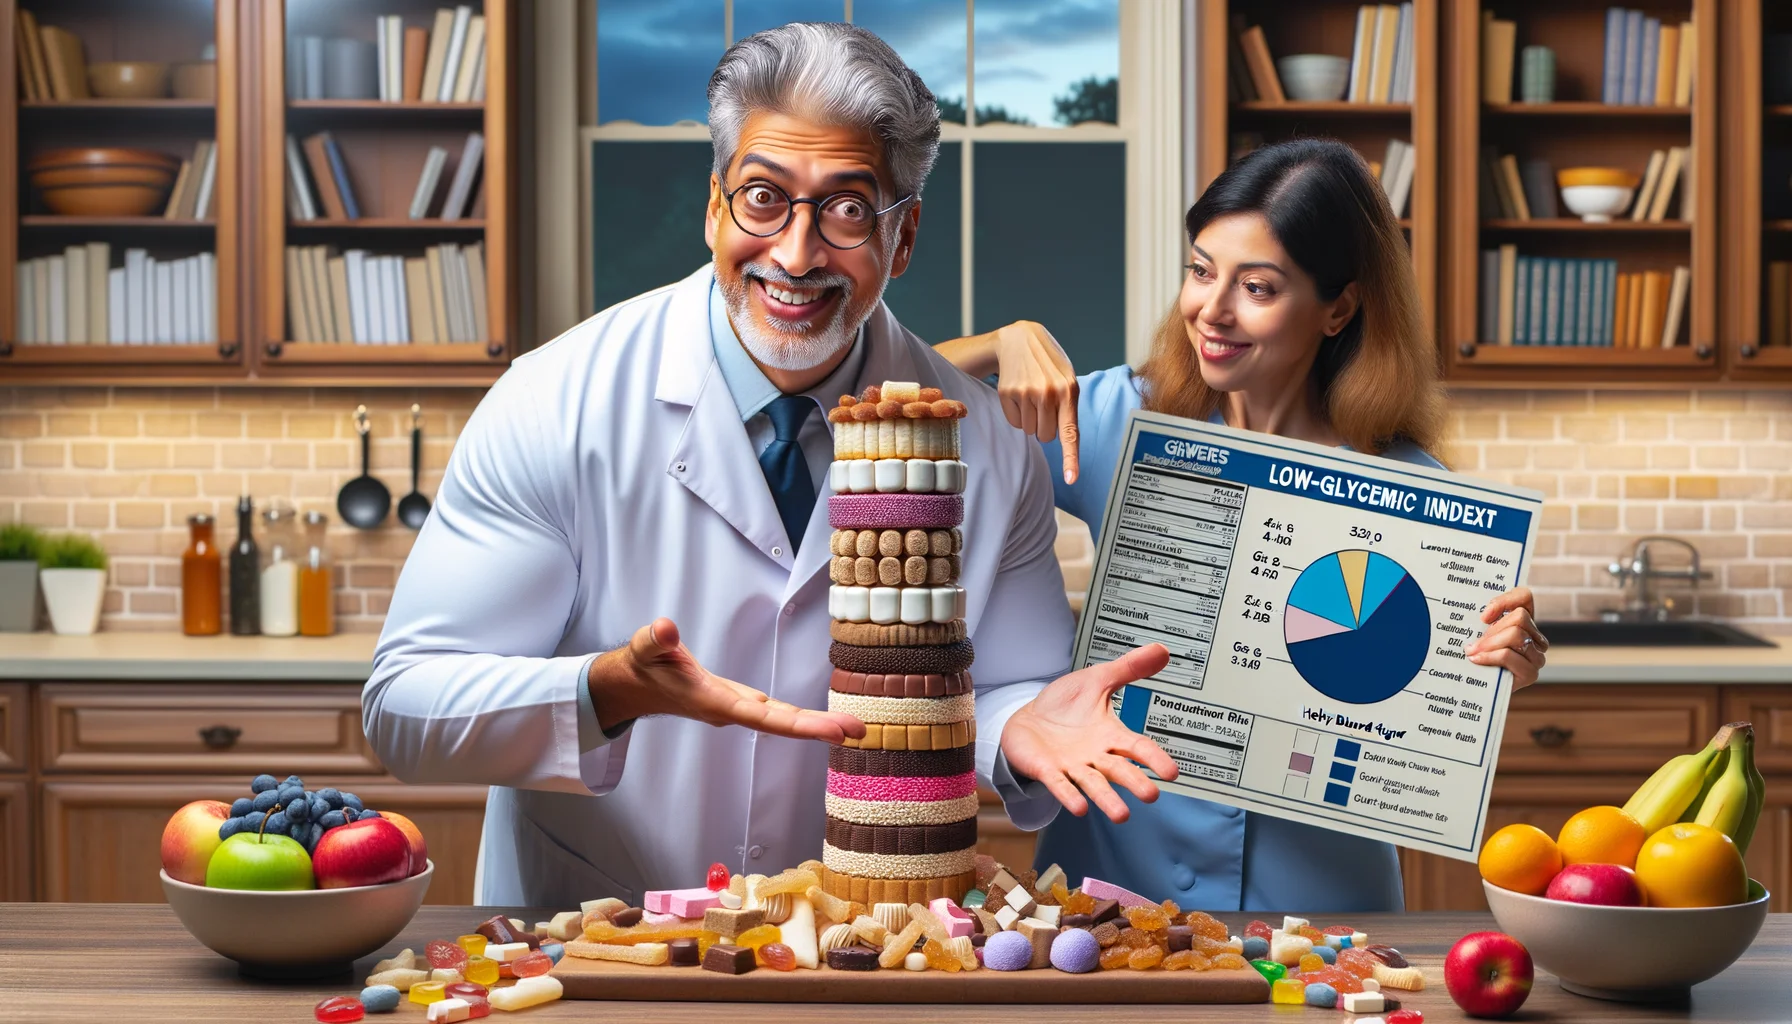 Imagine a humorous yet realistic scene where low-glycemic index (GI) sweets are being used to maintain stable blood sugar levels. A middle-aged Hispanic man with a light hearted expression is carefully balancing a stack of colorful low-GI sweets on his fingertips, showcasing the diversity of these healthy treats. Beside him, a South-Asian woman, a nutritionist, holds a large chart detailing the different kinds of low-GI sweets, their GI values and how they help regulate blood sugar. They stand in a well-lit kitchen, adorned with cookbooks and health charts, the embodiment of a perfect environment promoting a healthy lifestyle.